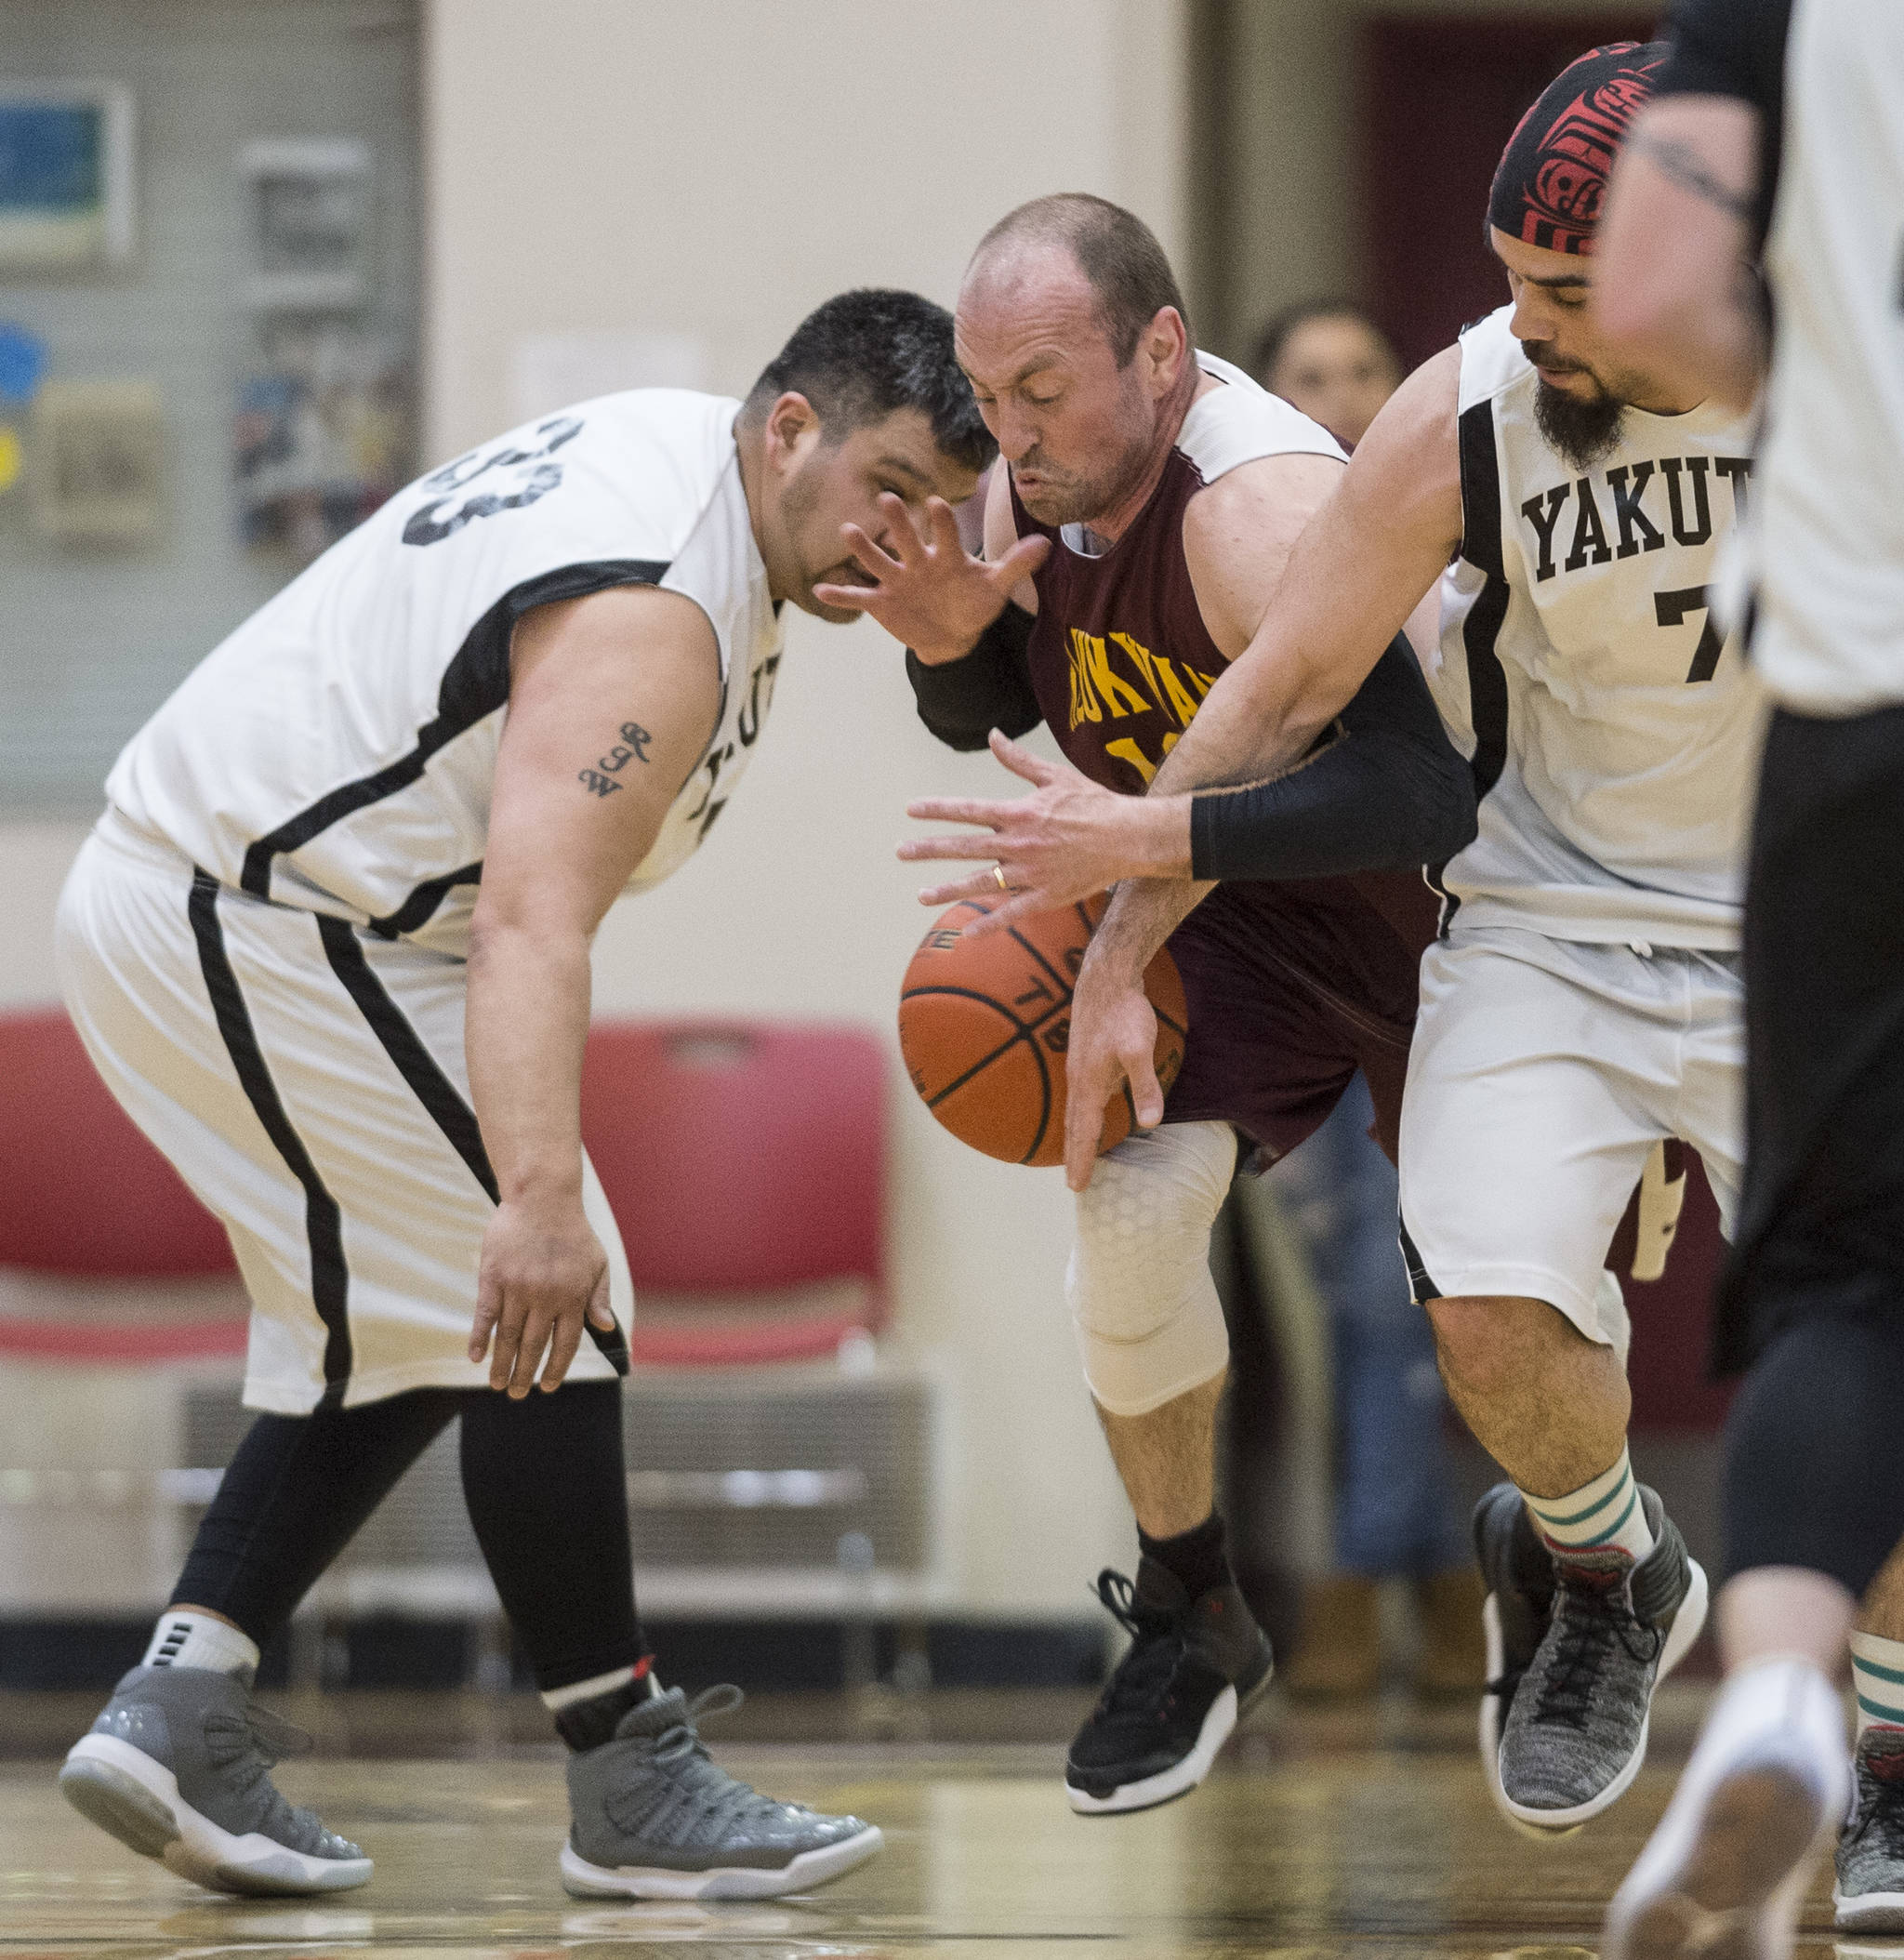 Klukwan’s Jason Shull, center, is sandwiched by Yakutat’s Ralph Wolfe, left, and JP Buller at the Juneau Lions Club 73rd Annual Gold Medal Basketball Tournament at Juneau-Douglas High School: Yadaa.at Kalé on Tuesday, March 19, 2019. Klukwan won 94-61. (Michael Penn | Juneau Empire)